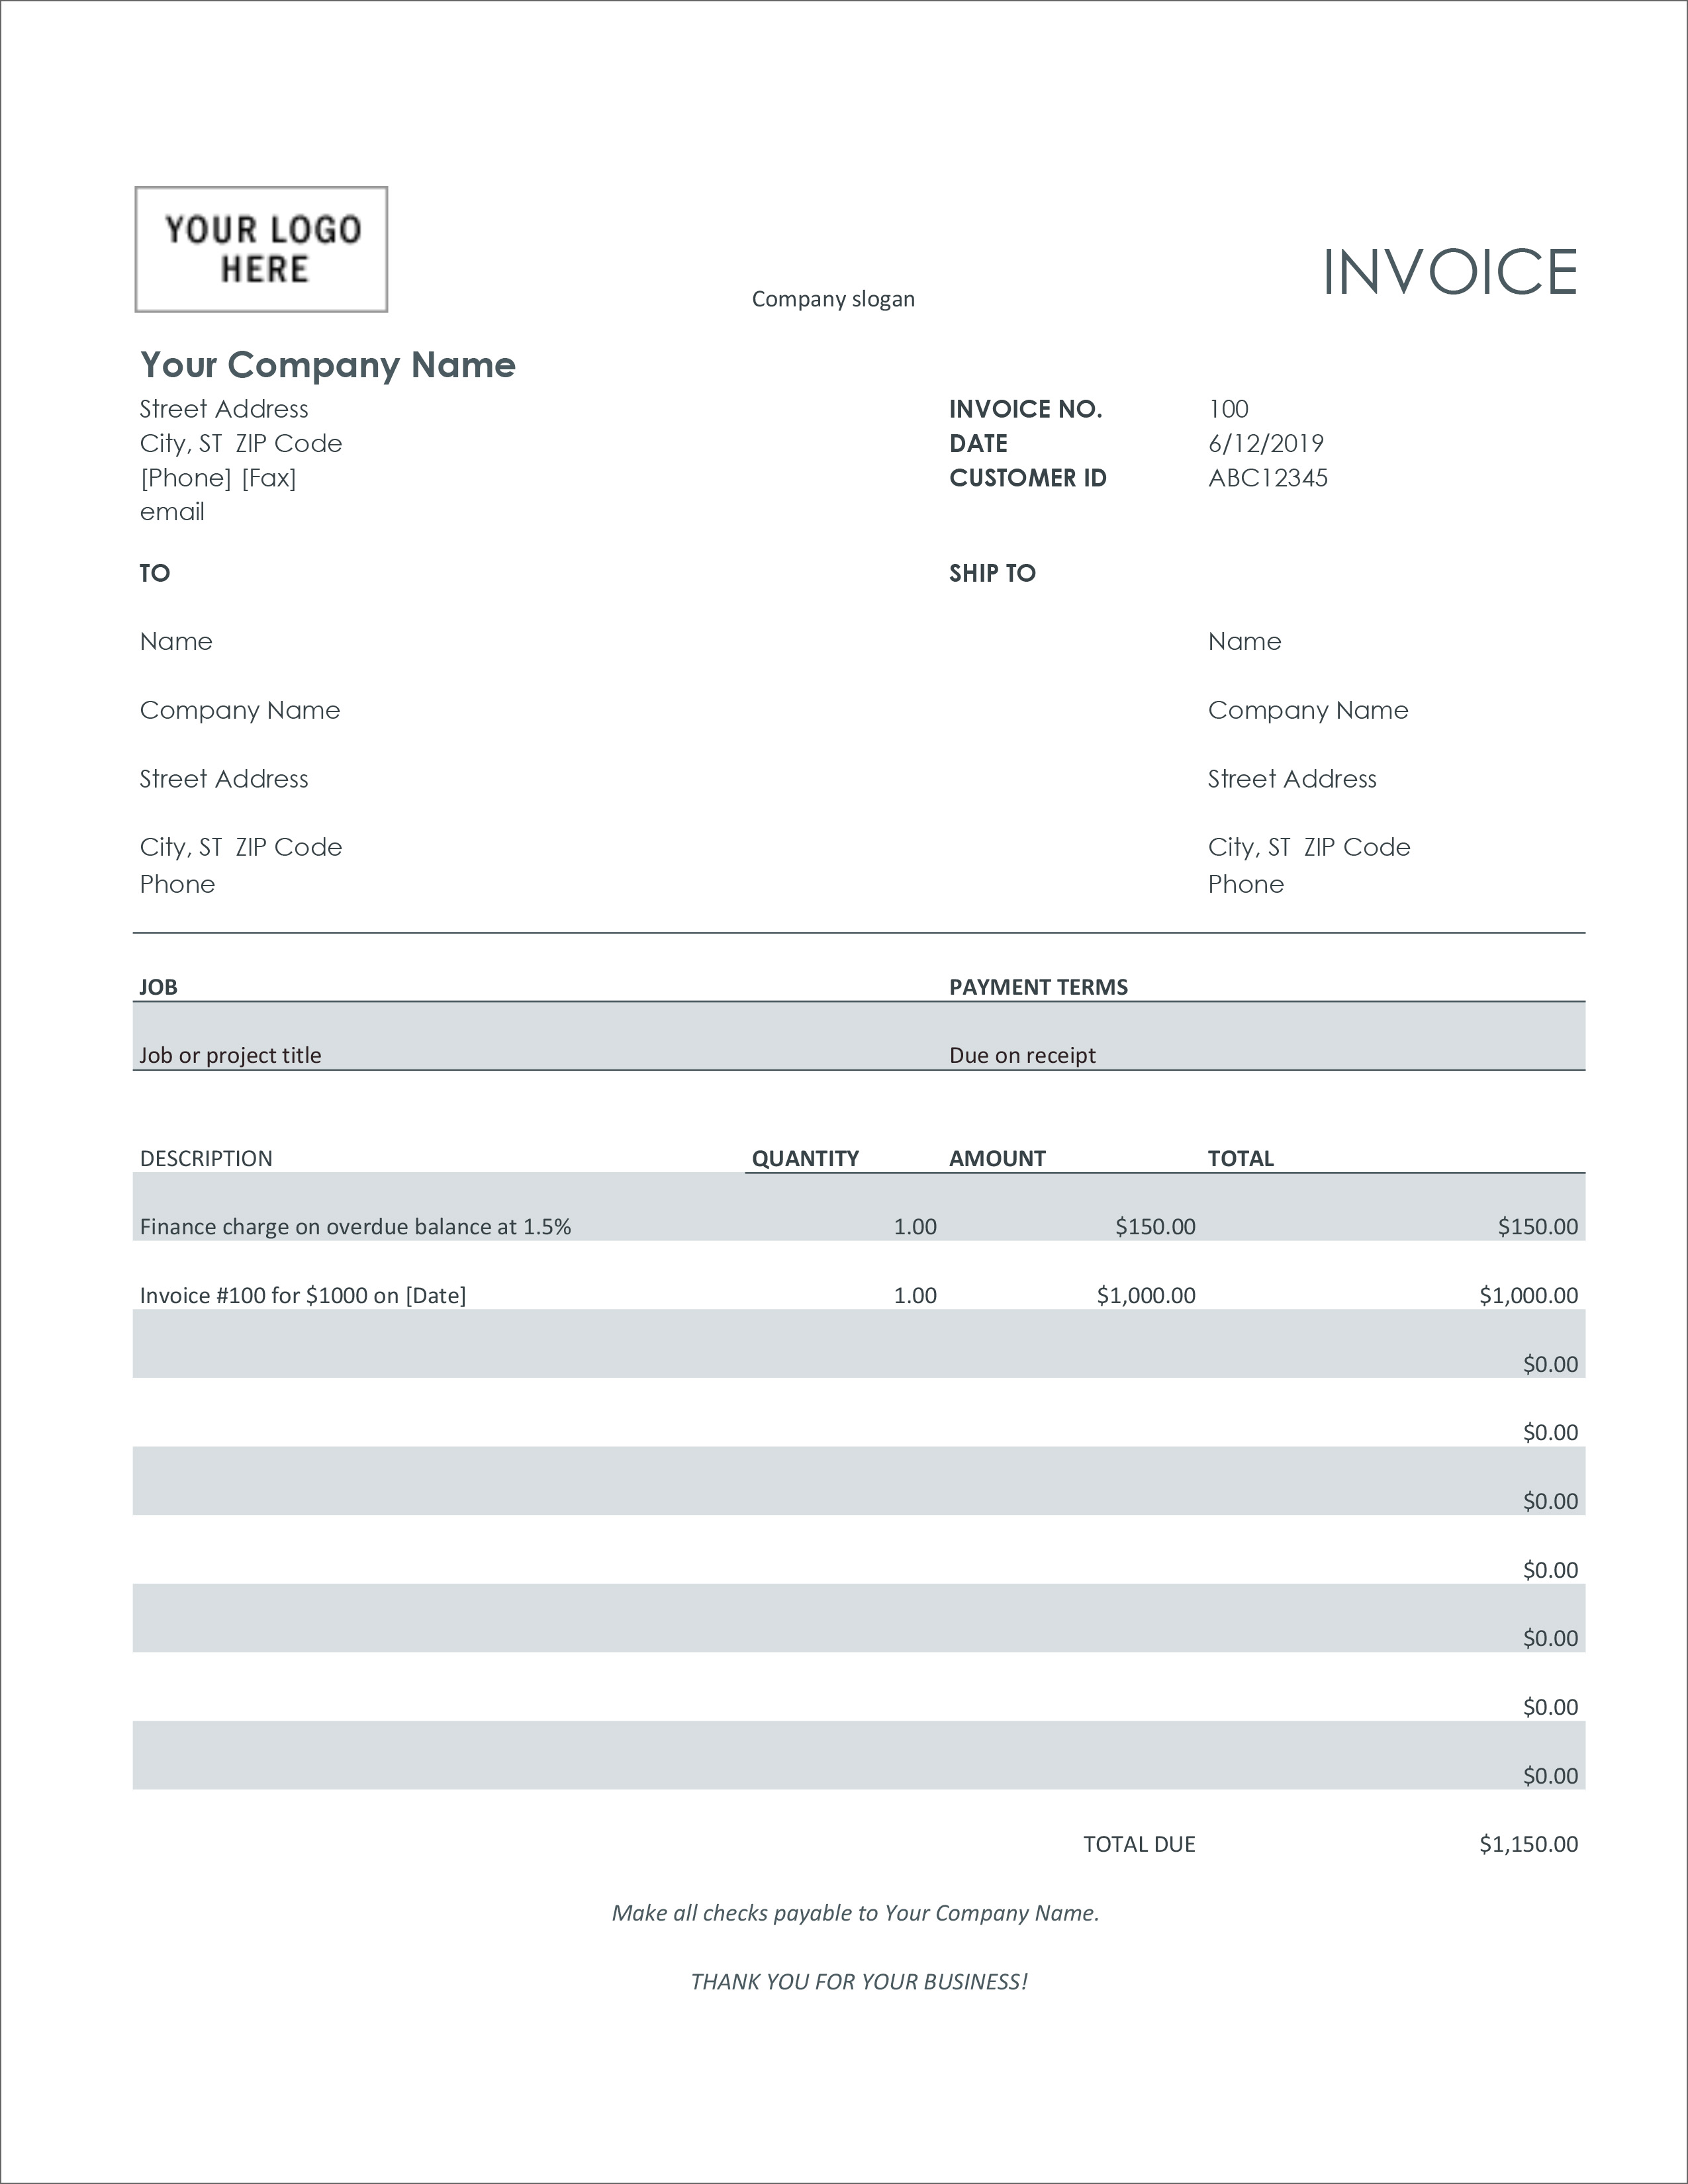 23 Free Invoice Templates In Microsoft Excel And DOCX Formats Intended For Interest Invoice Template